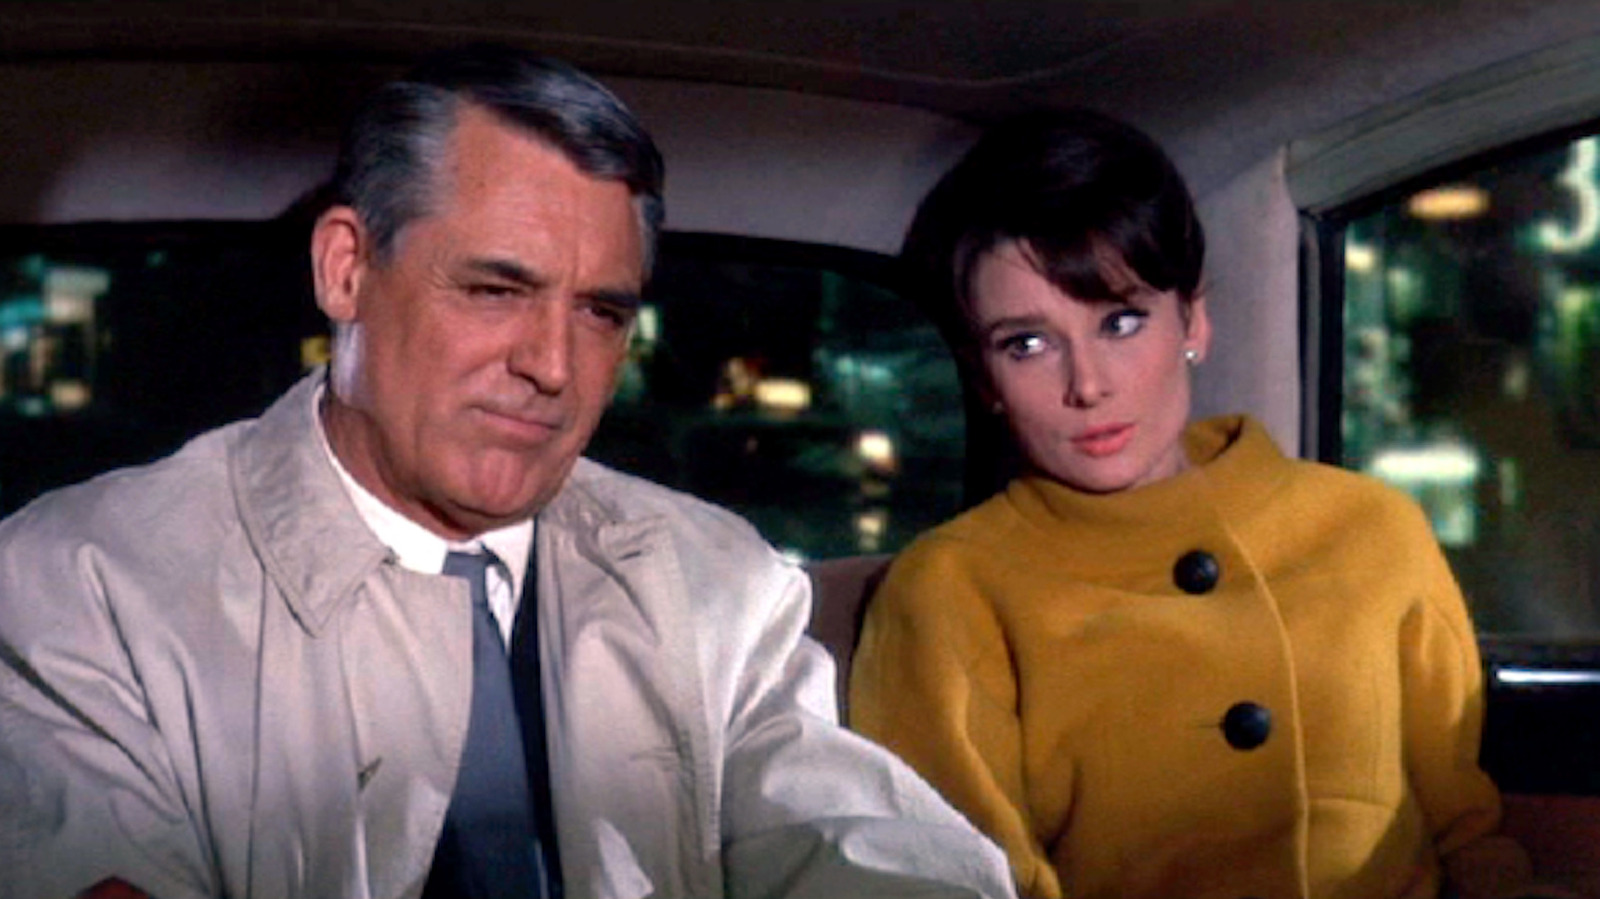 #Charade Marked The End Of An Era For Cary Grant’s Film Career